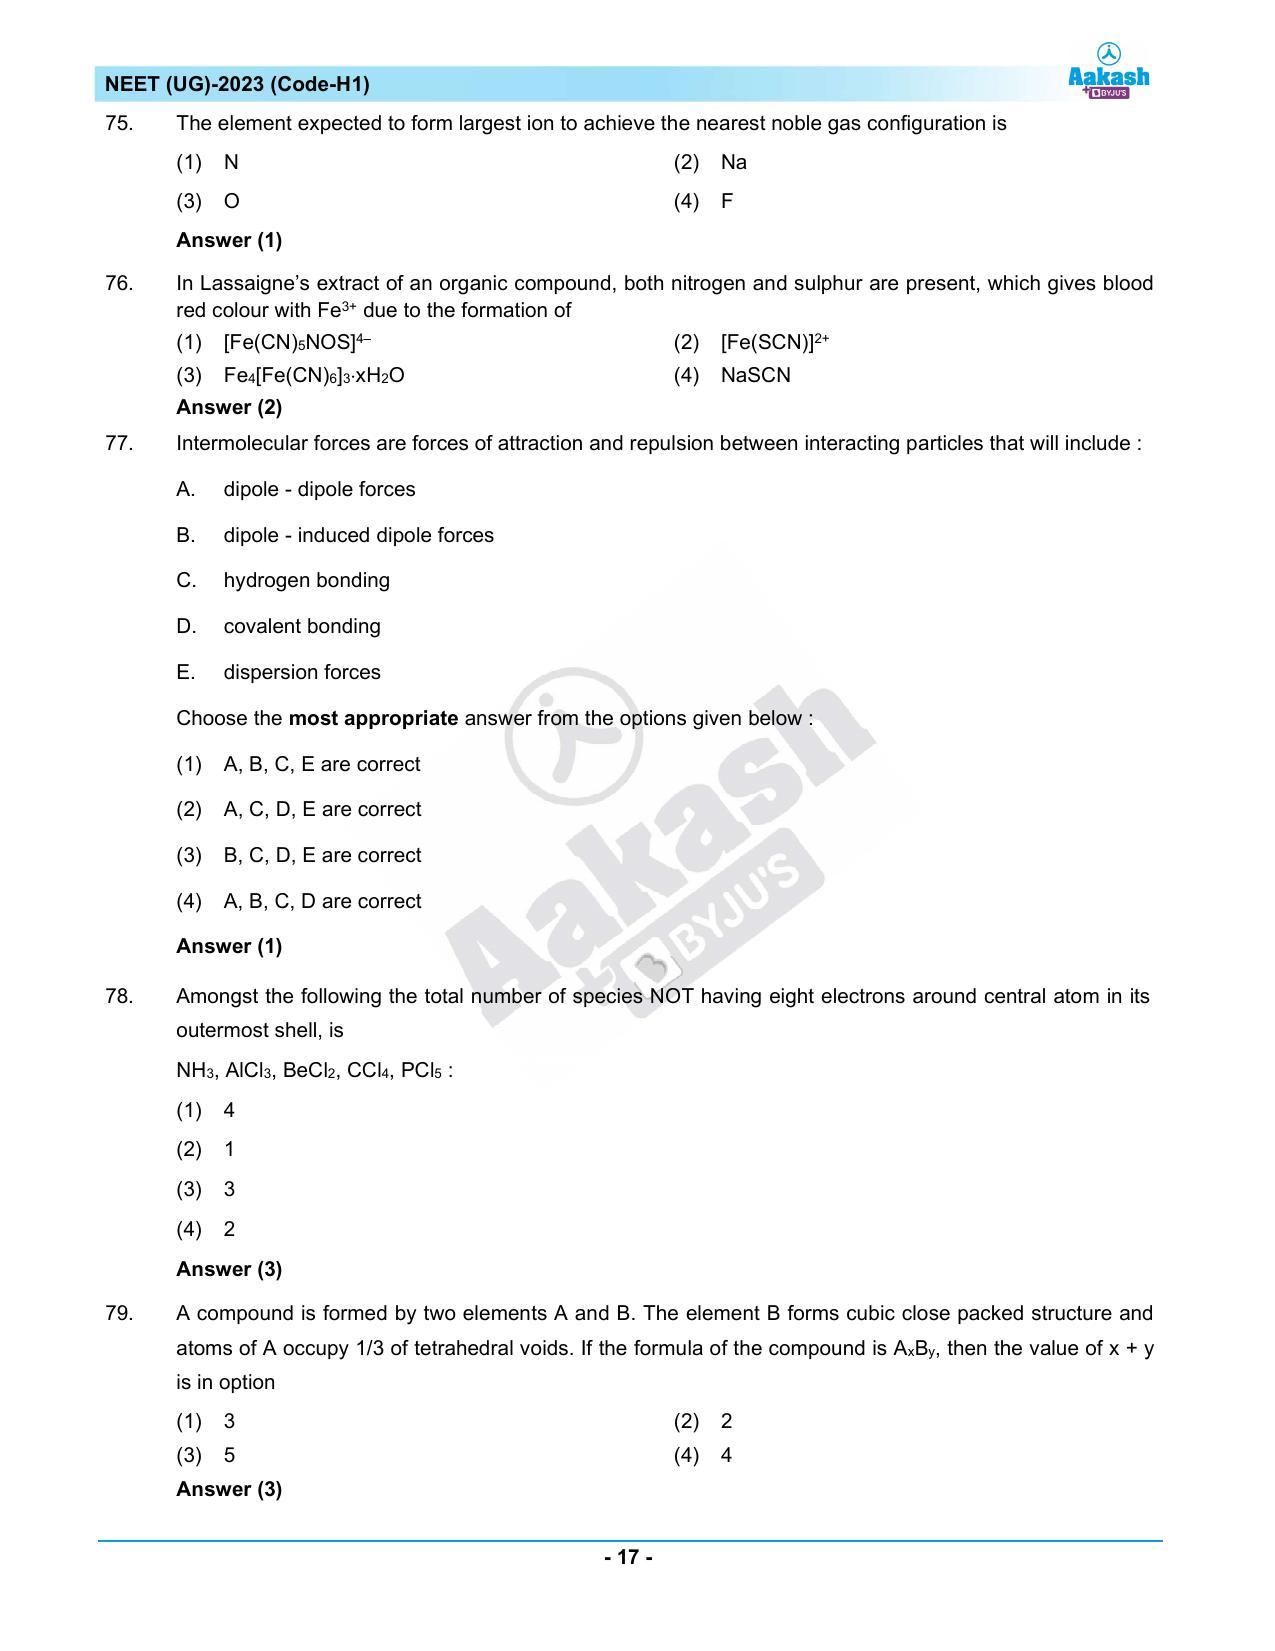 NEET 2023 Question Paper H1 - Page 17